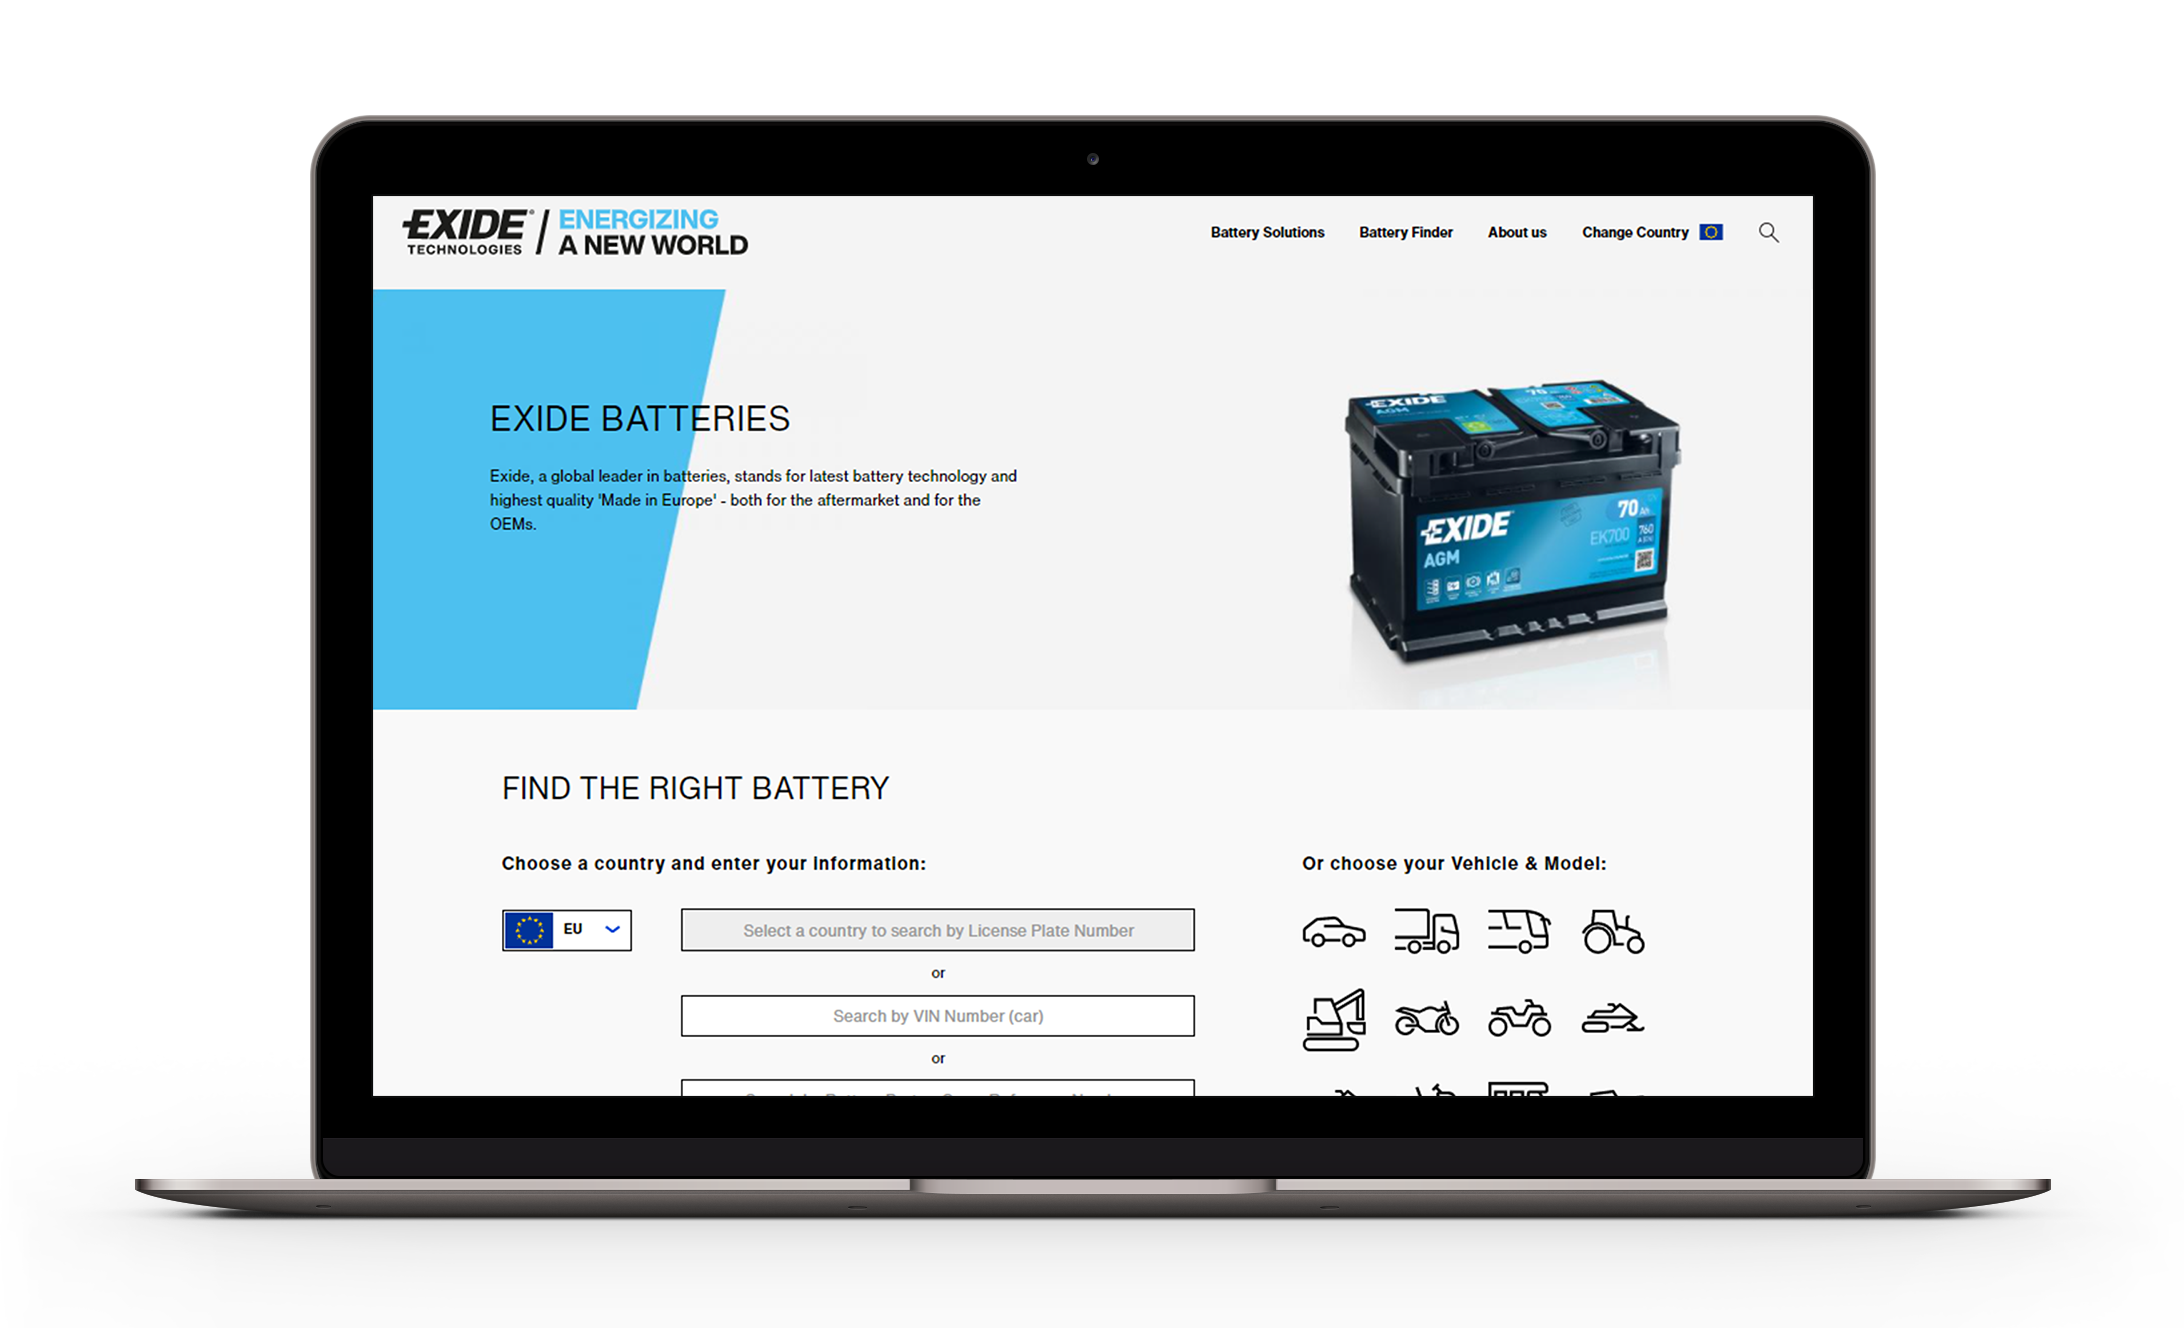 Product search on the website of Exide Technologies, a company manufacturing batteries